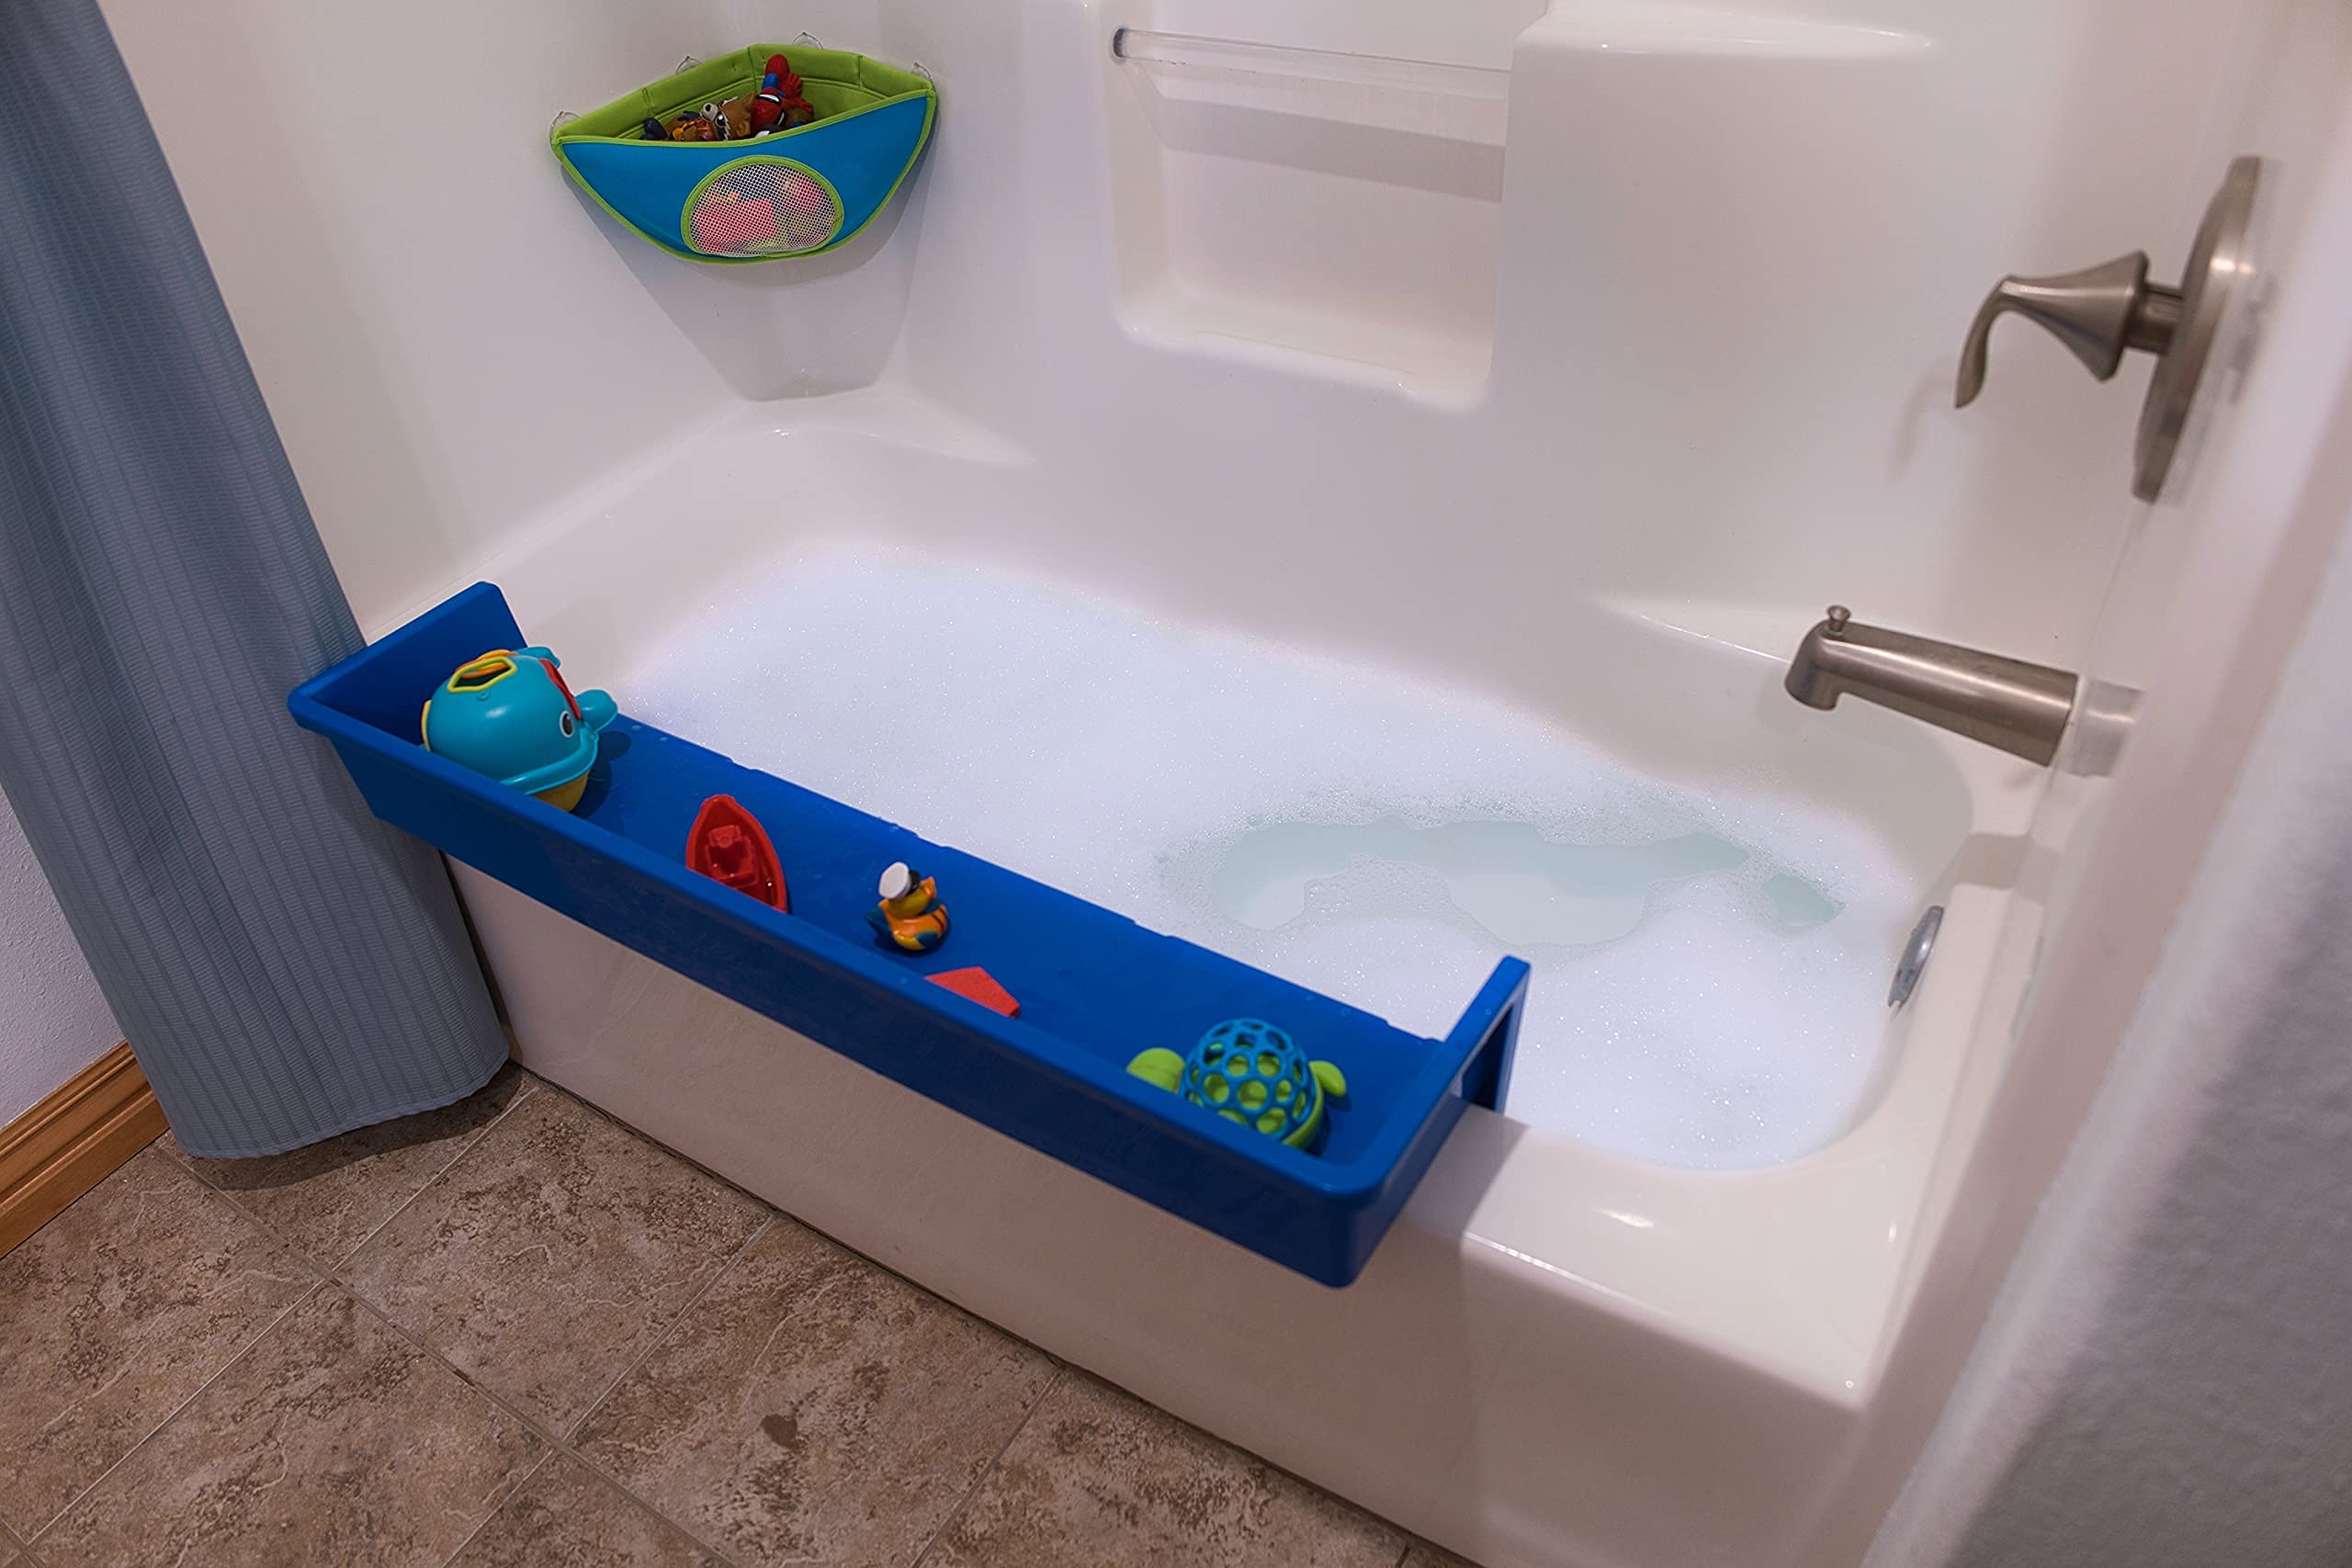 Tub Topper® Bathtub Splash Guard Play Shelf Area -Toy Tray Caddy Holder Storage -Suction Cups Attach to Bath Tub -No Mess Water Spill in Bathroom -Fun for Toddlers Kids Baby